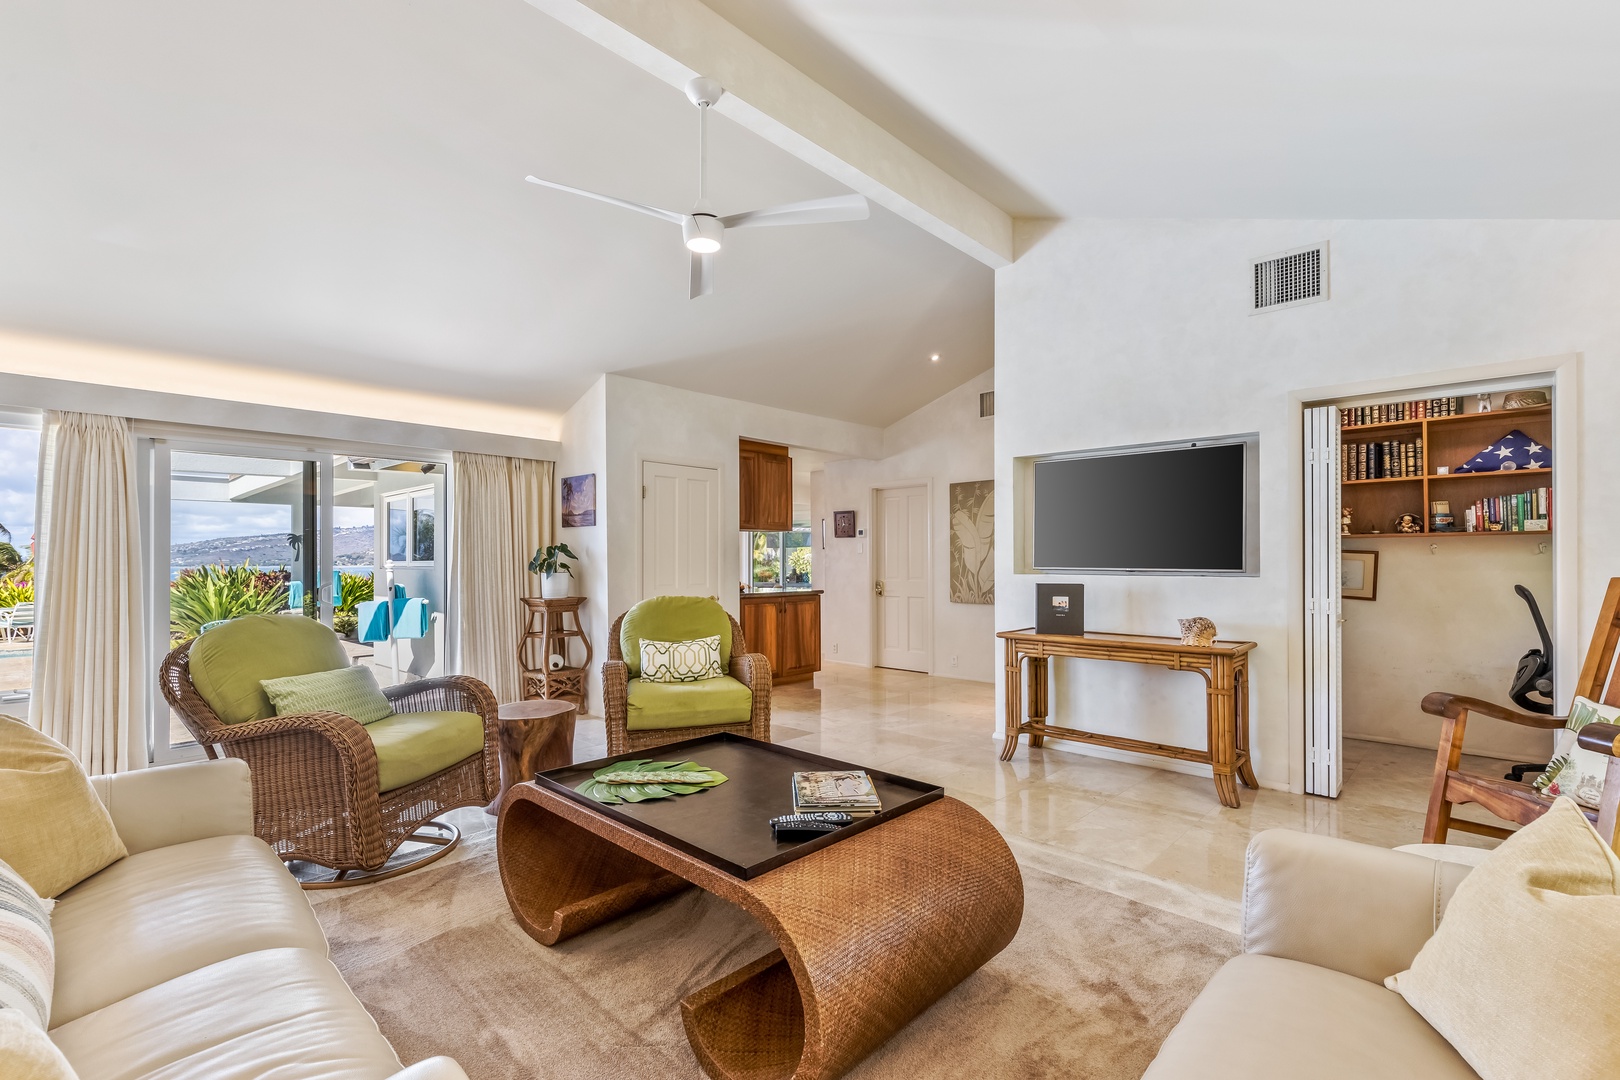 Honolulu Vacation Rentals, Hale Ola - Lounge in the living area with TV and lanai view.